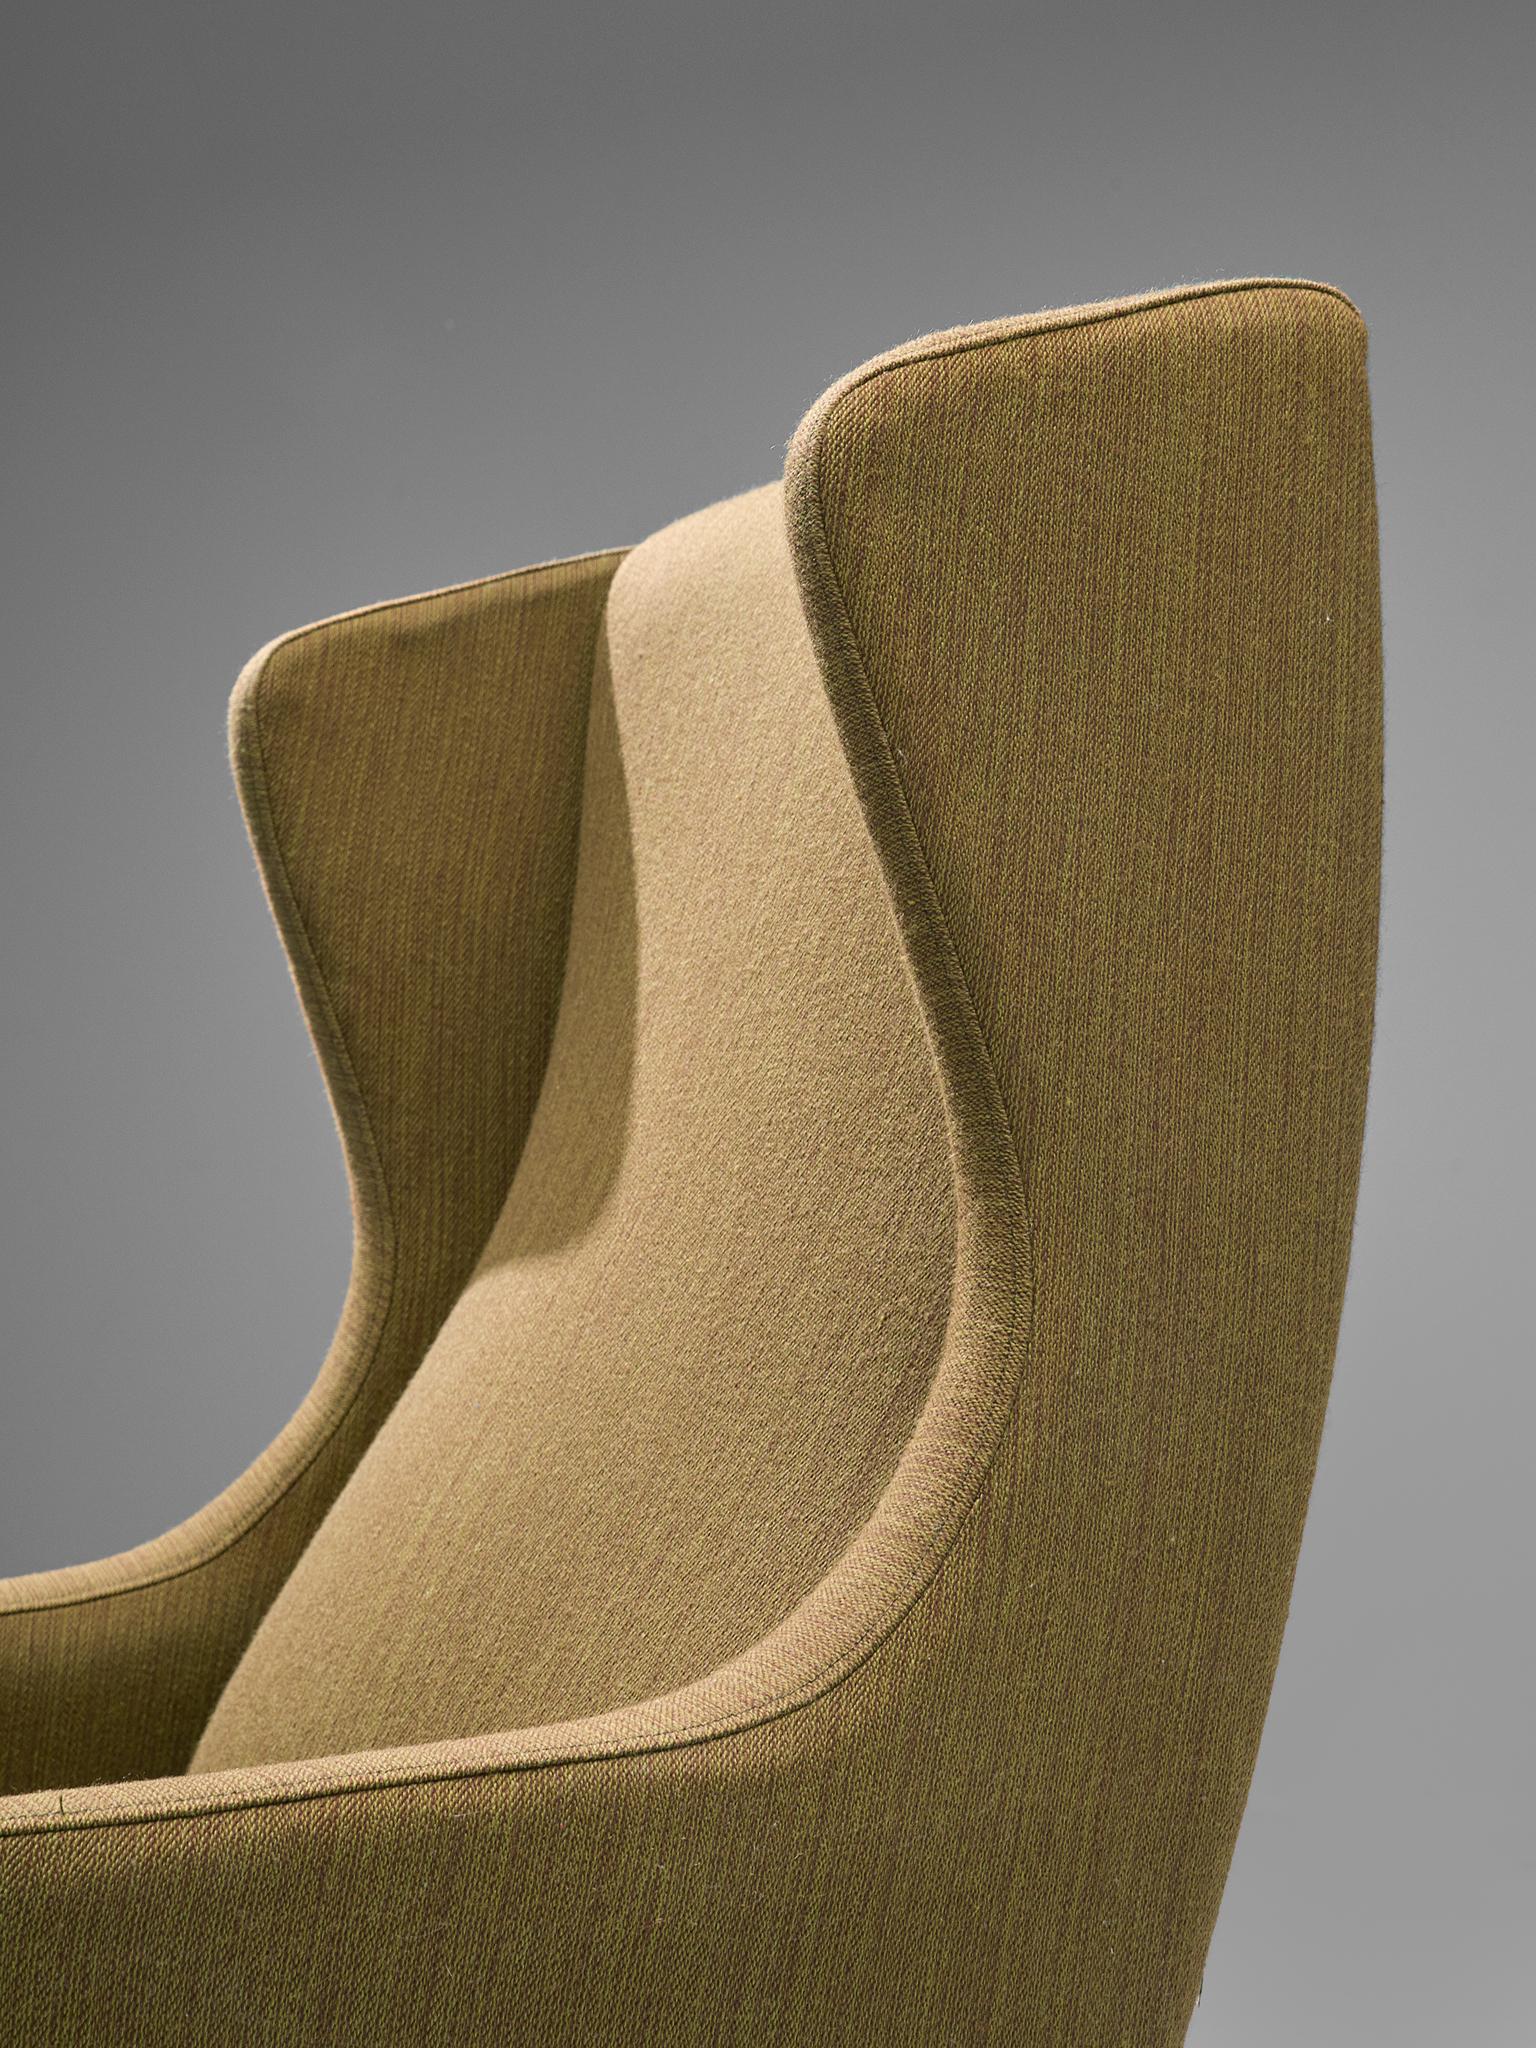 upholstered wingback chair